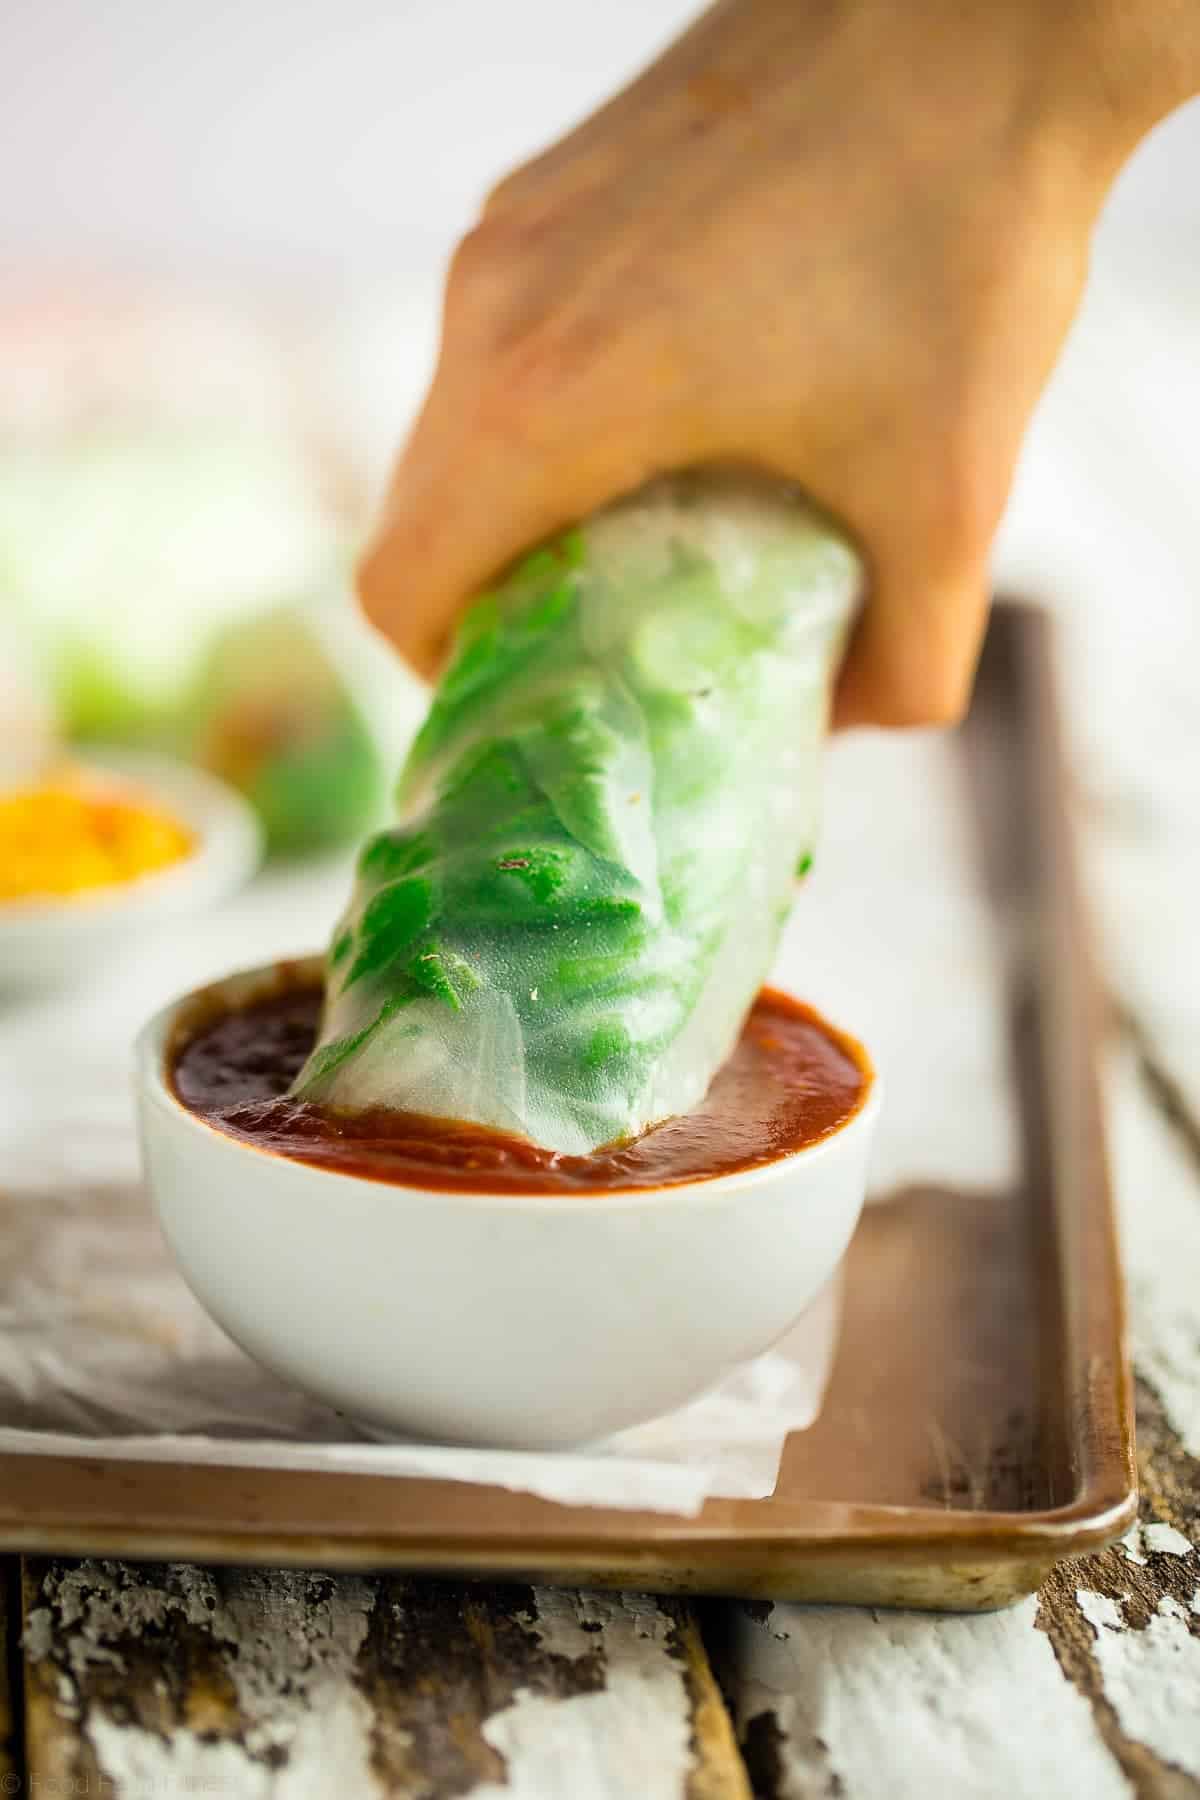 Healthy BBQ Chicken Summer Rolls - The classic Thai Summer Rolls get a fun, gluten free makeover with chicken, homemade BBQ sauce and sweet pineapple. Perfect for a light dinner or to serve on game day! | Foodfaithfitness.com | @FoodFaithFit